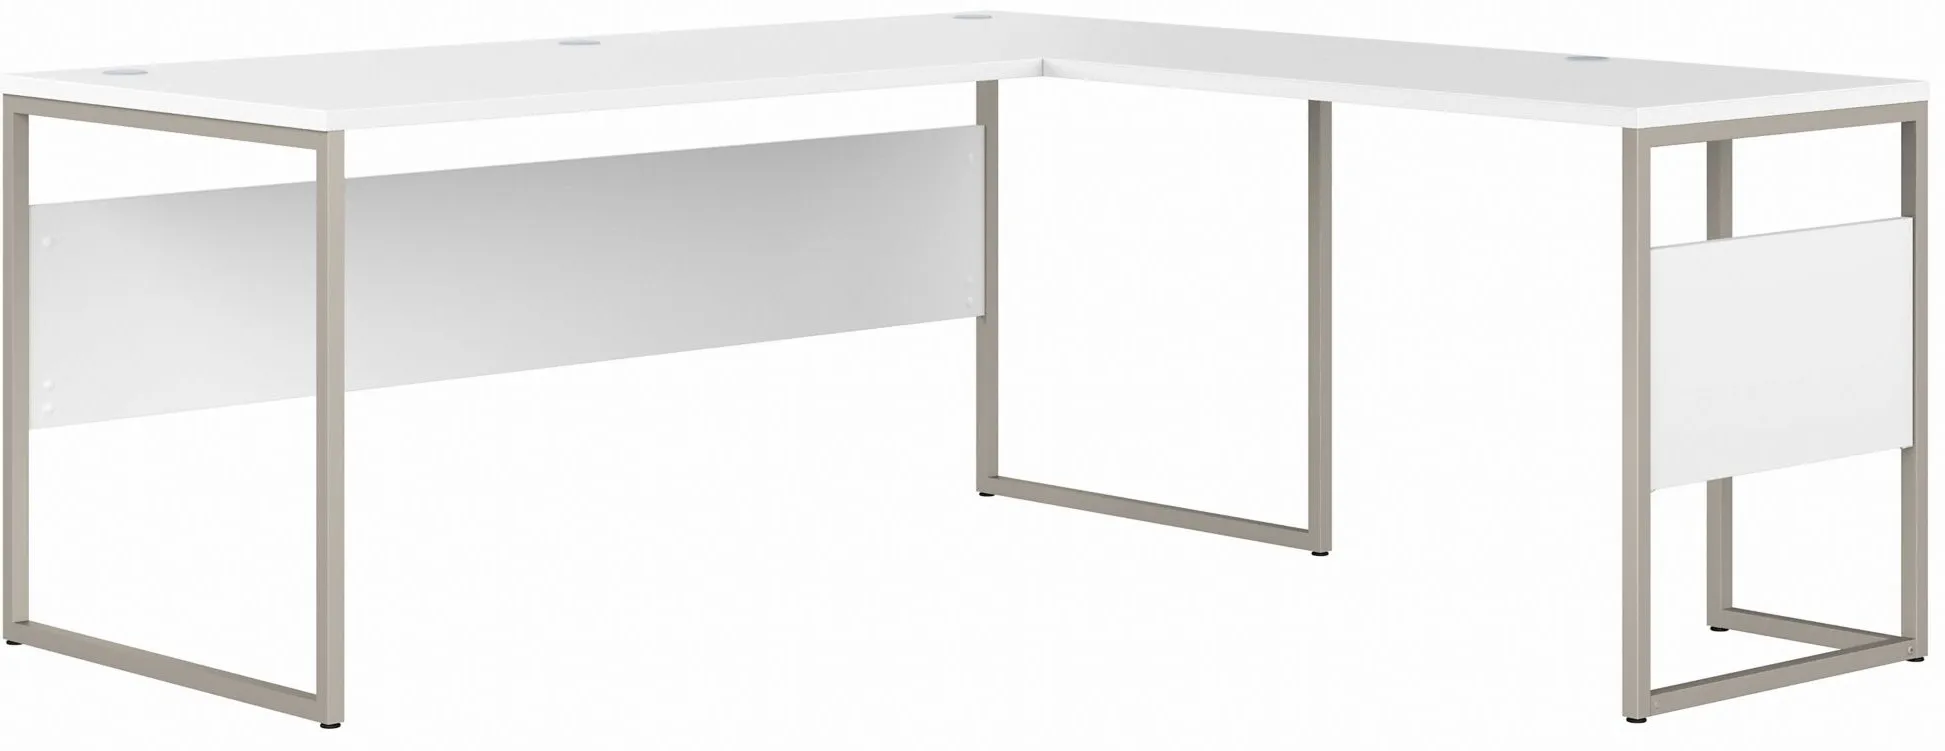 Steinbeck L-Shaped Computer Desk in White by Bush Industries